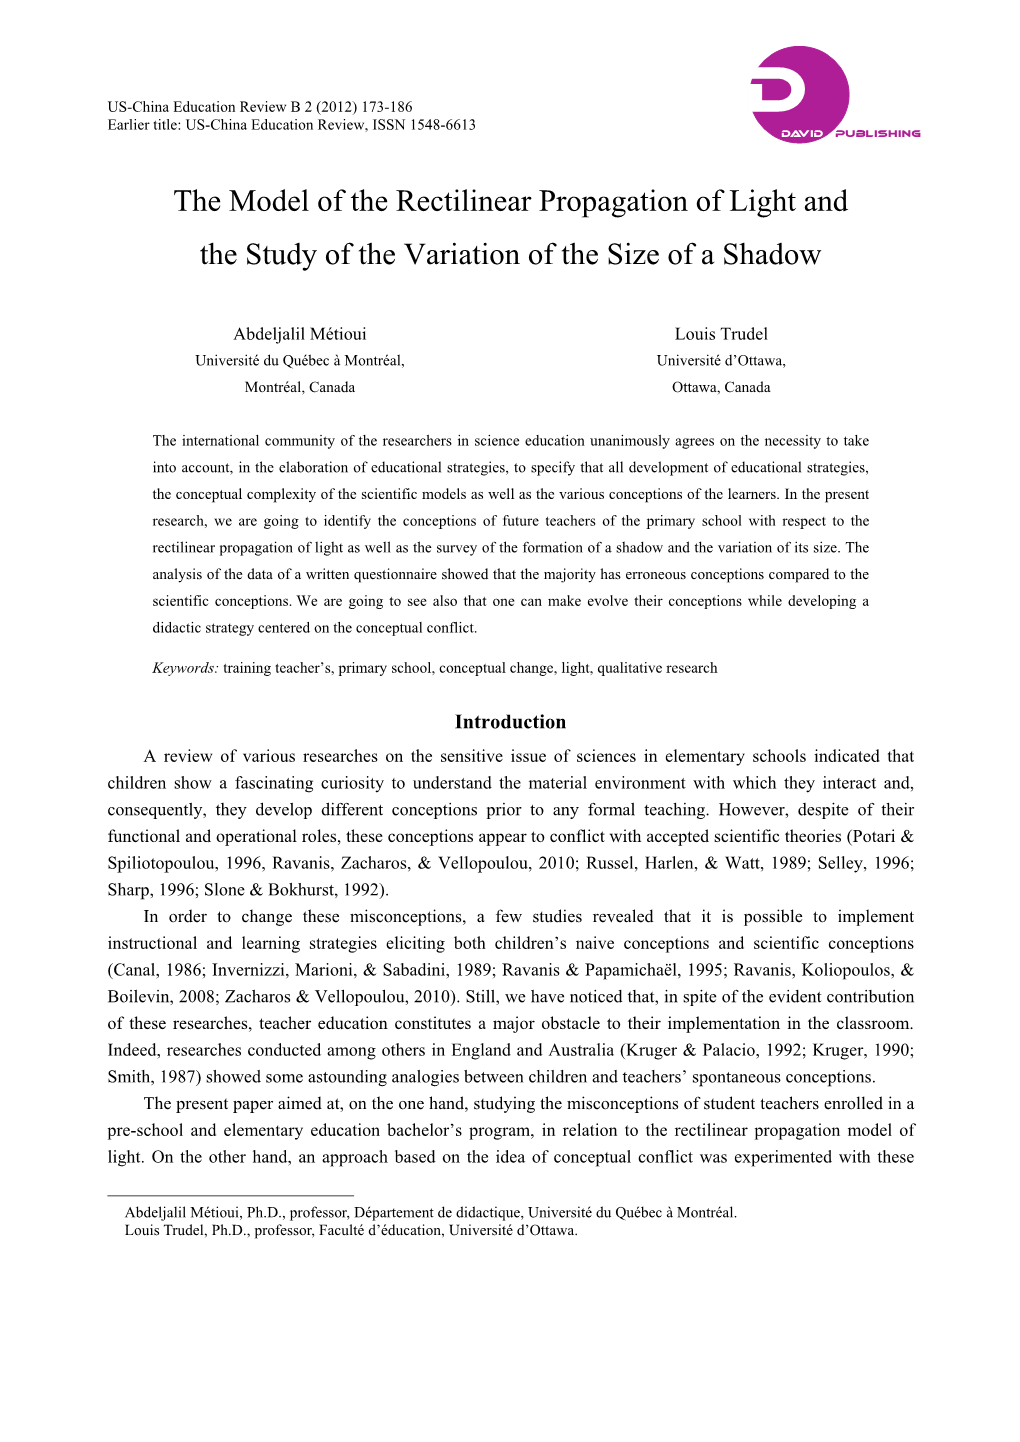 The Model of the Rectilinear Propagation of Light and the Study of the Variation of the Size of a Shadow